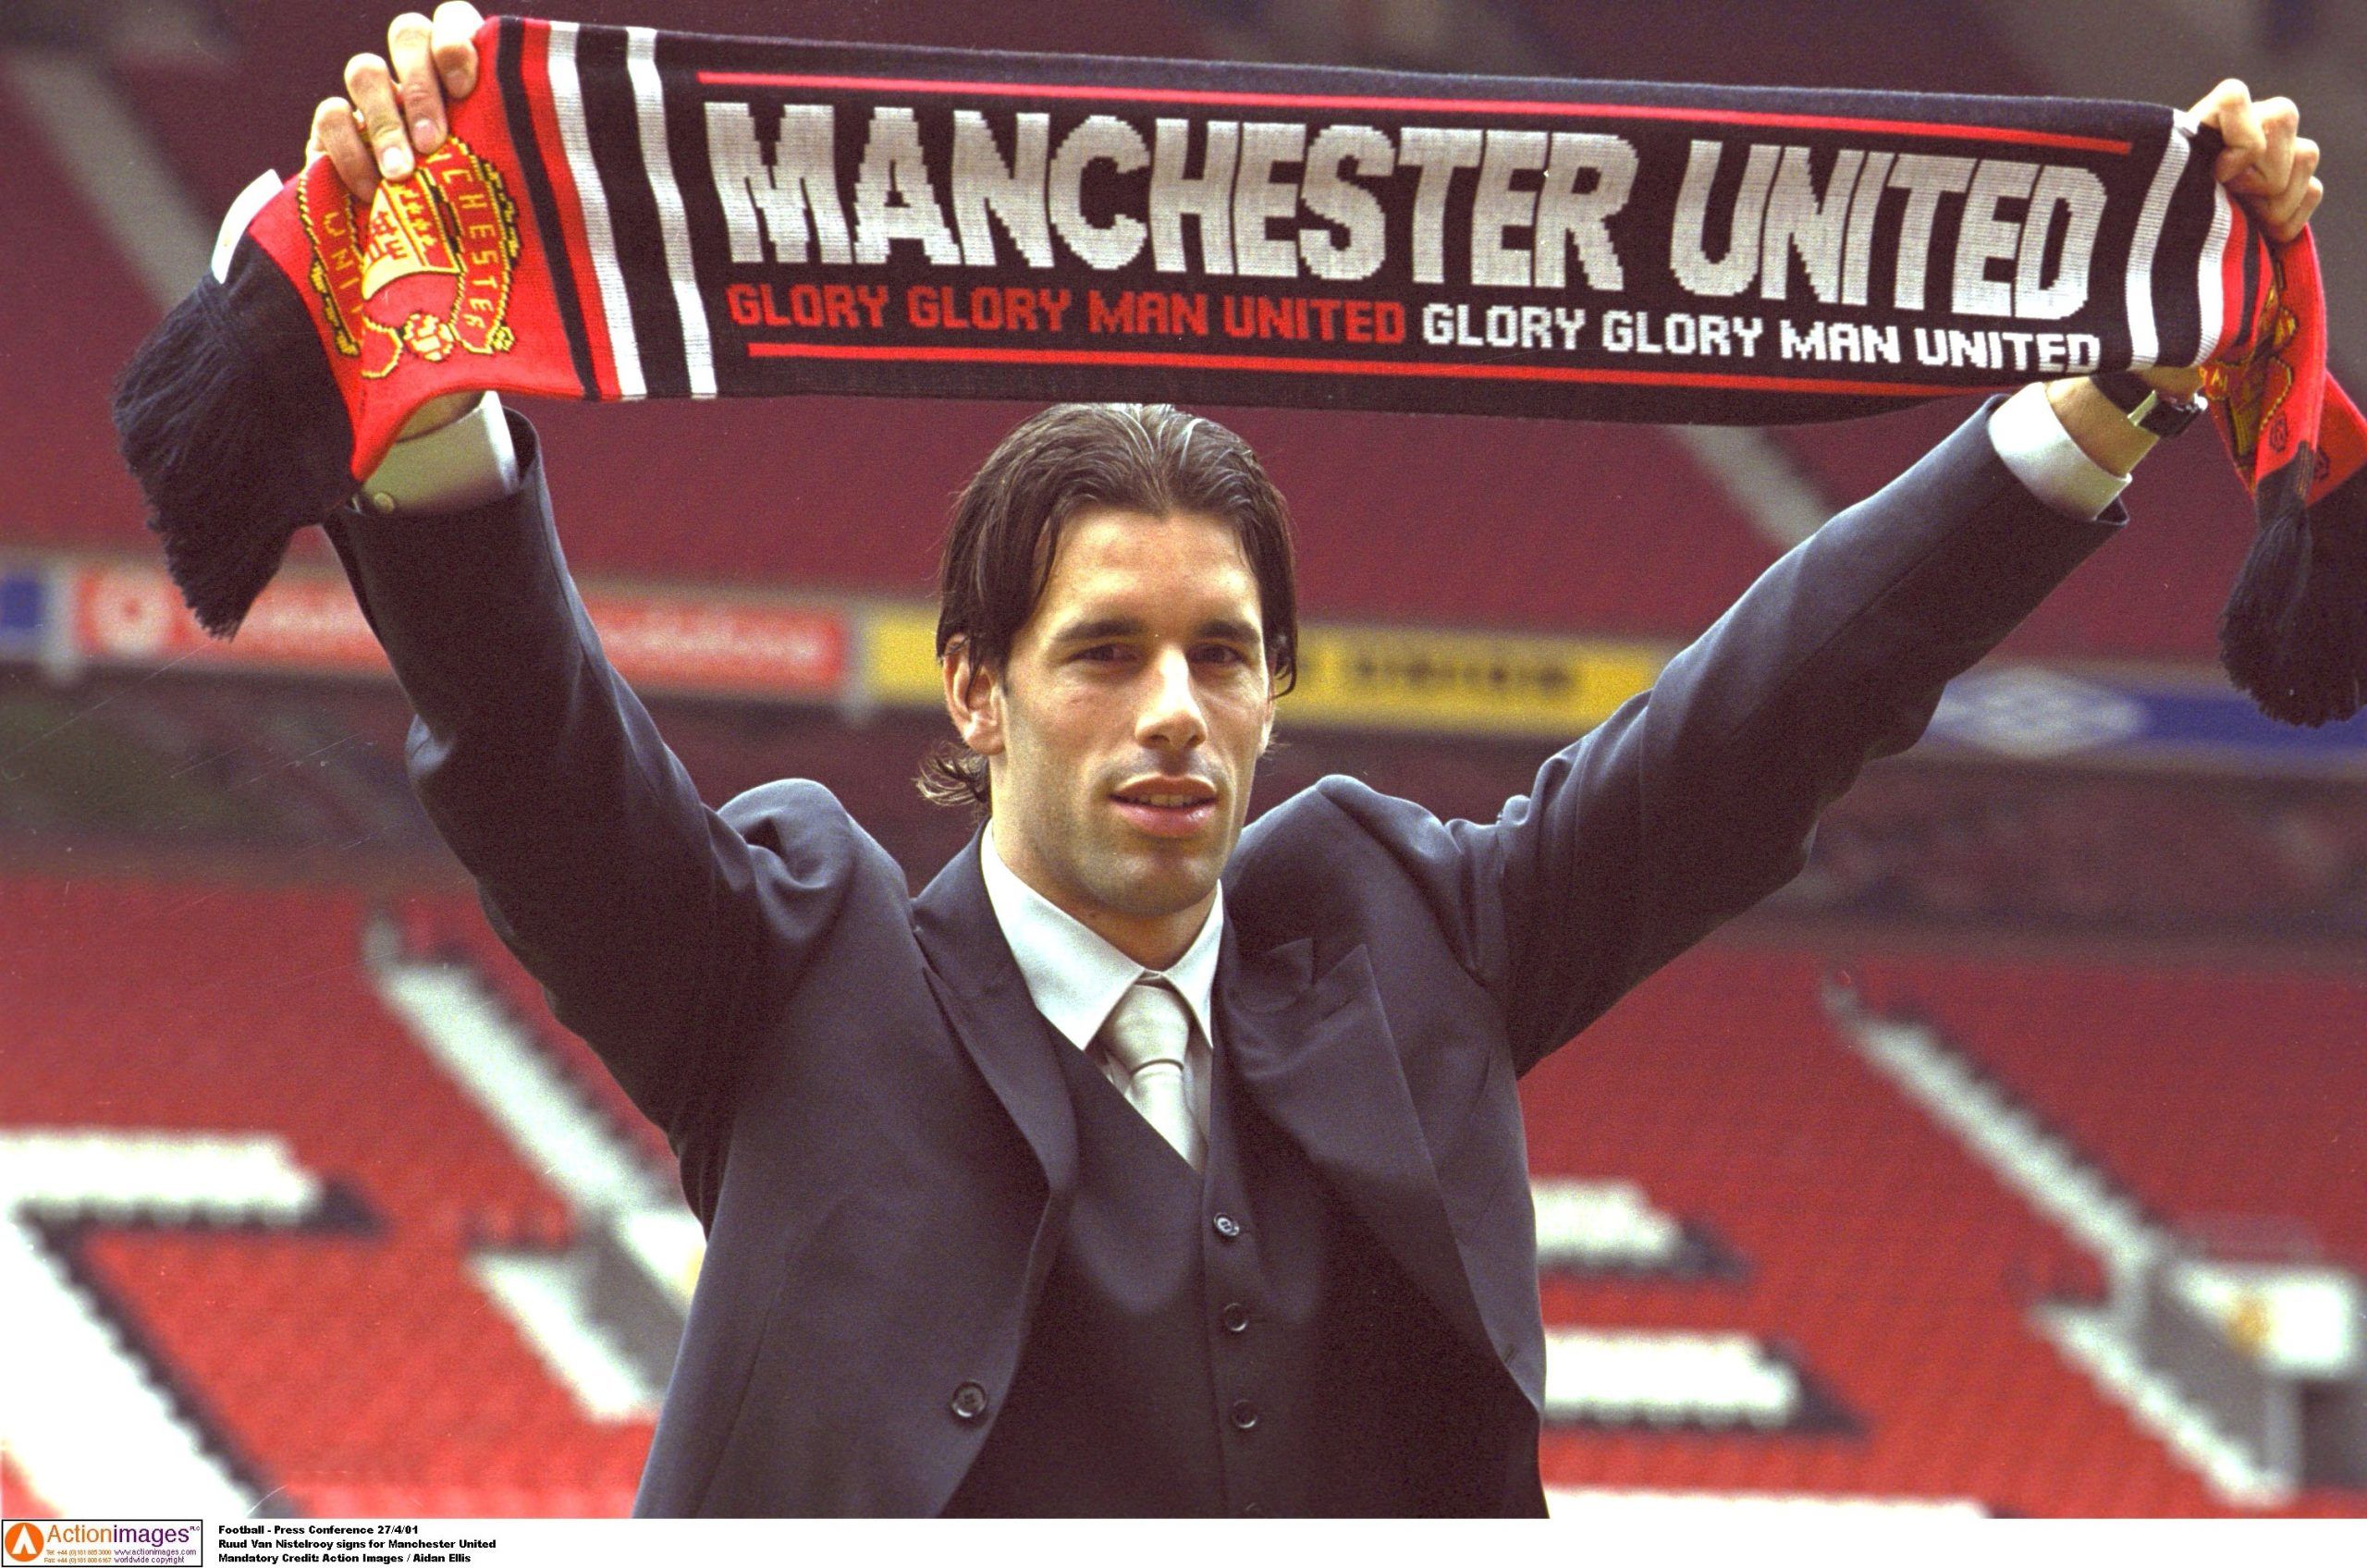 Football - Press Conference 27/4/01 
Ruud Van Nistelrooy signs for Manchester United 
Mandatory Credit: Action Images / Aidan Ellis